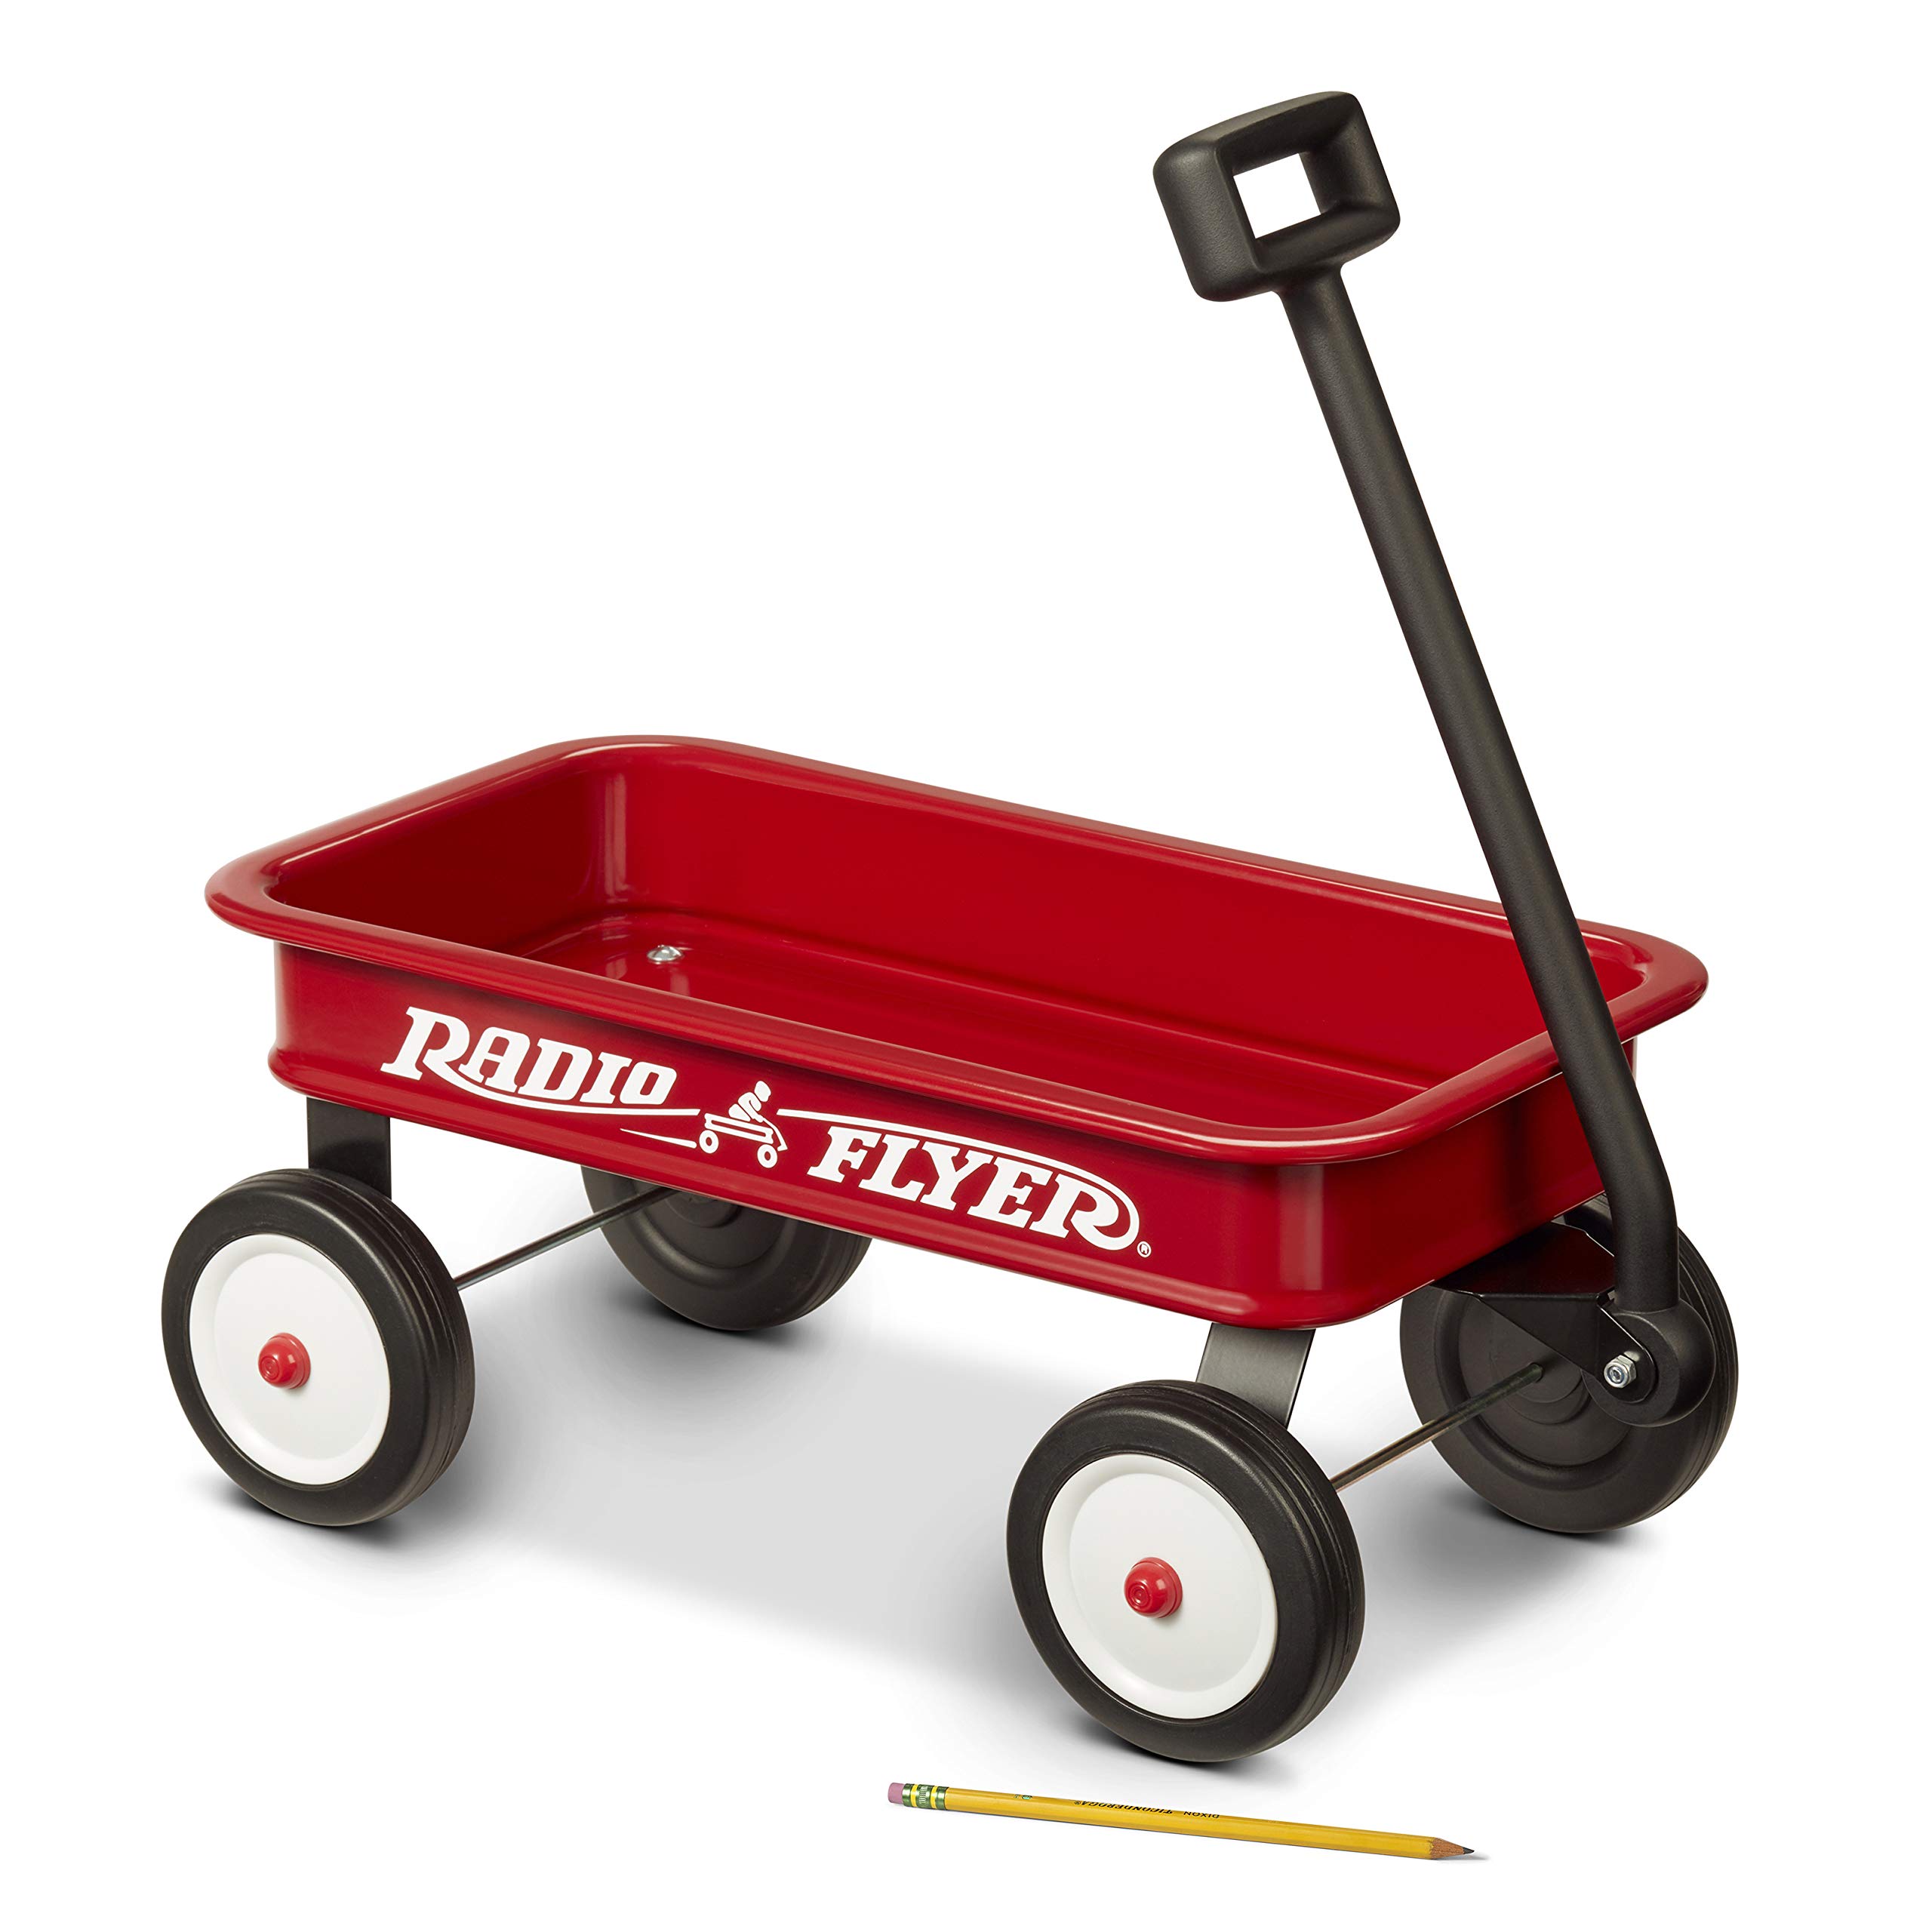 Radio Flyer 16.5 Inch Long My 1st Wagon Toy, For Ages 1.5+, Red